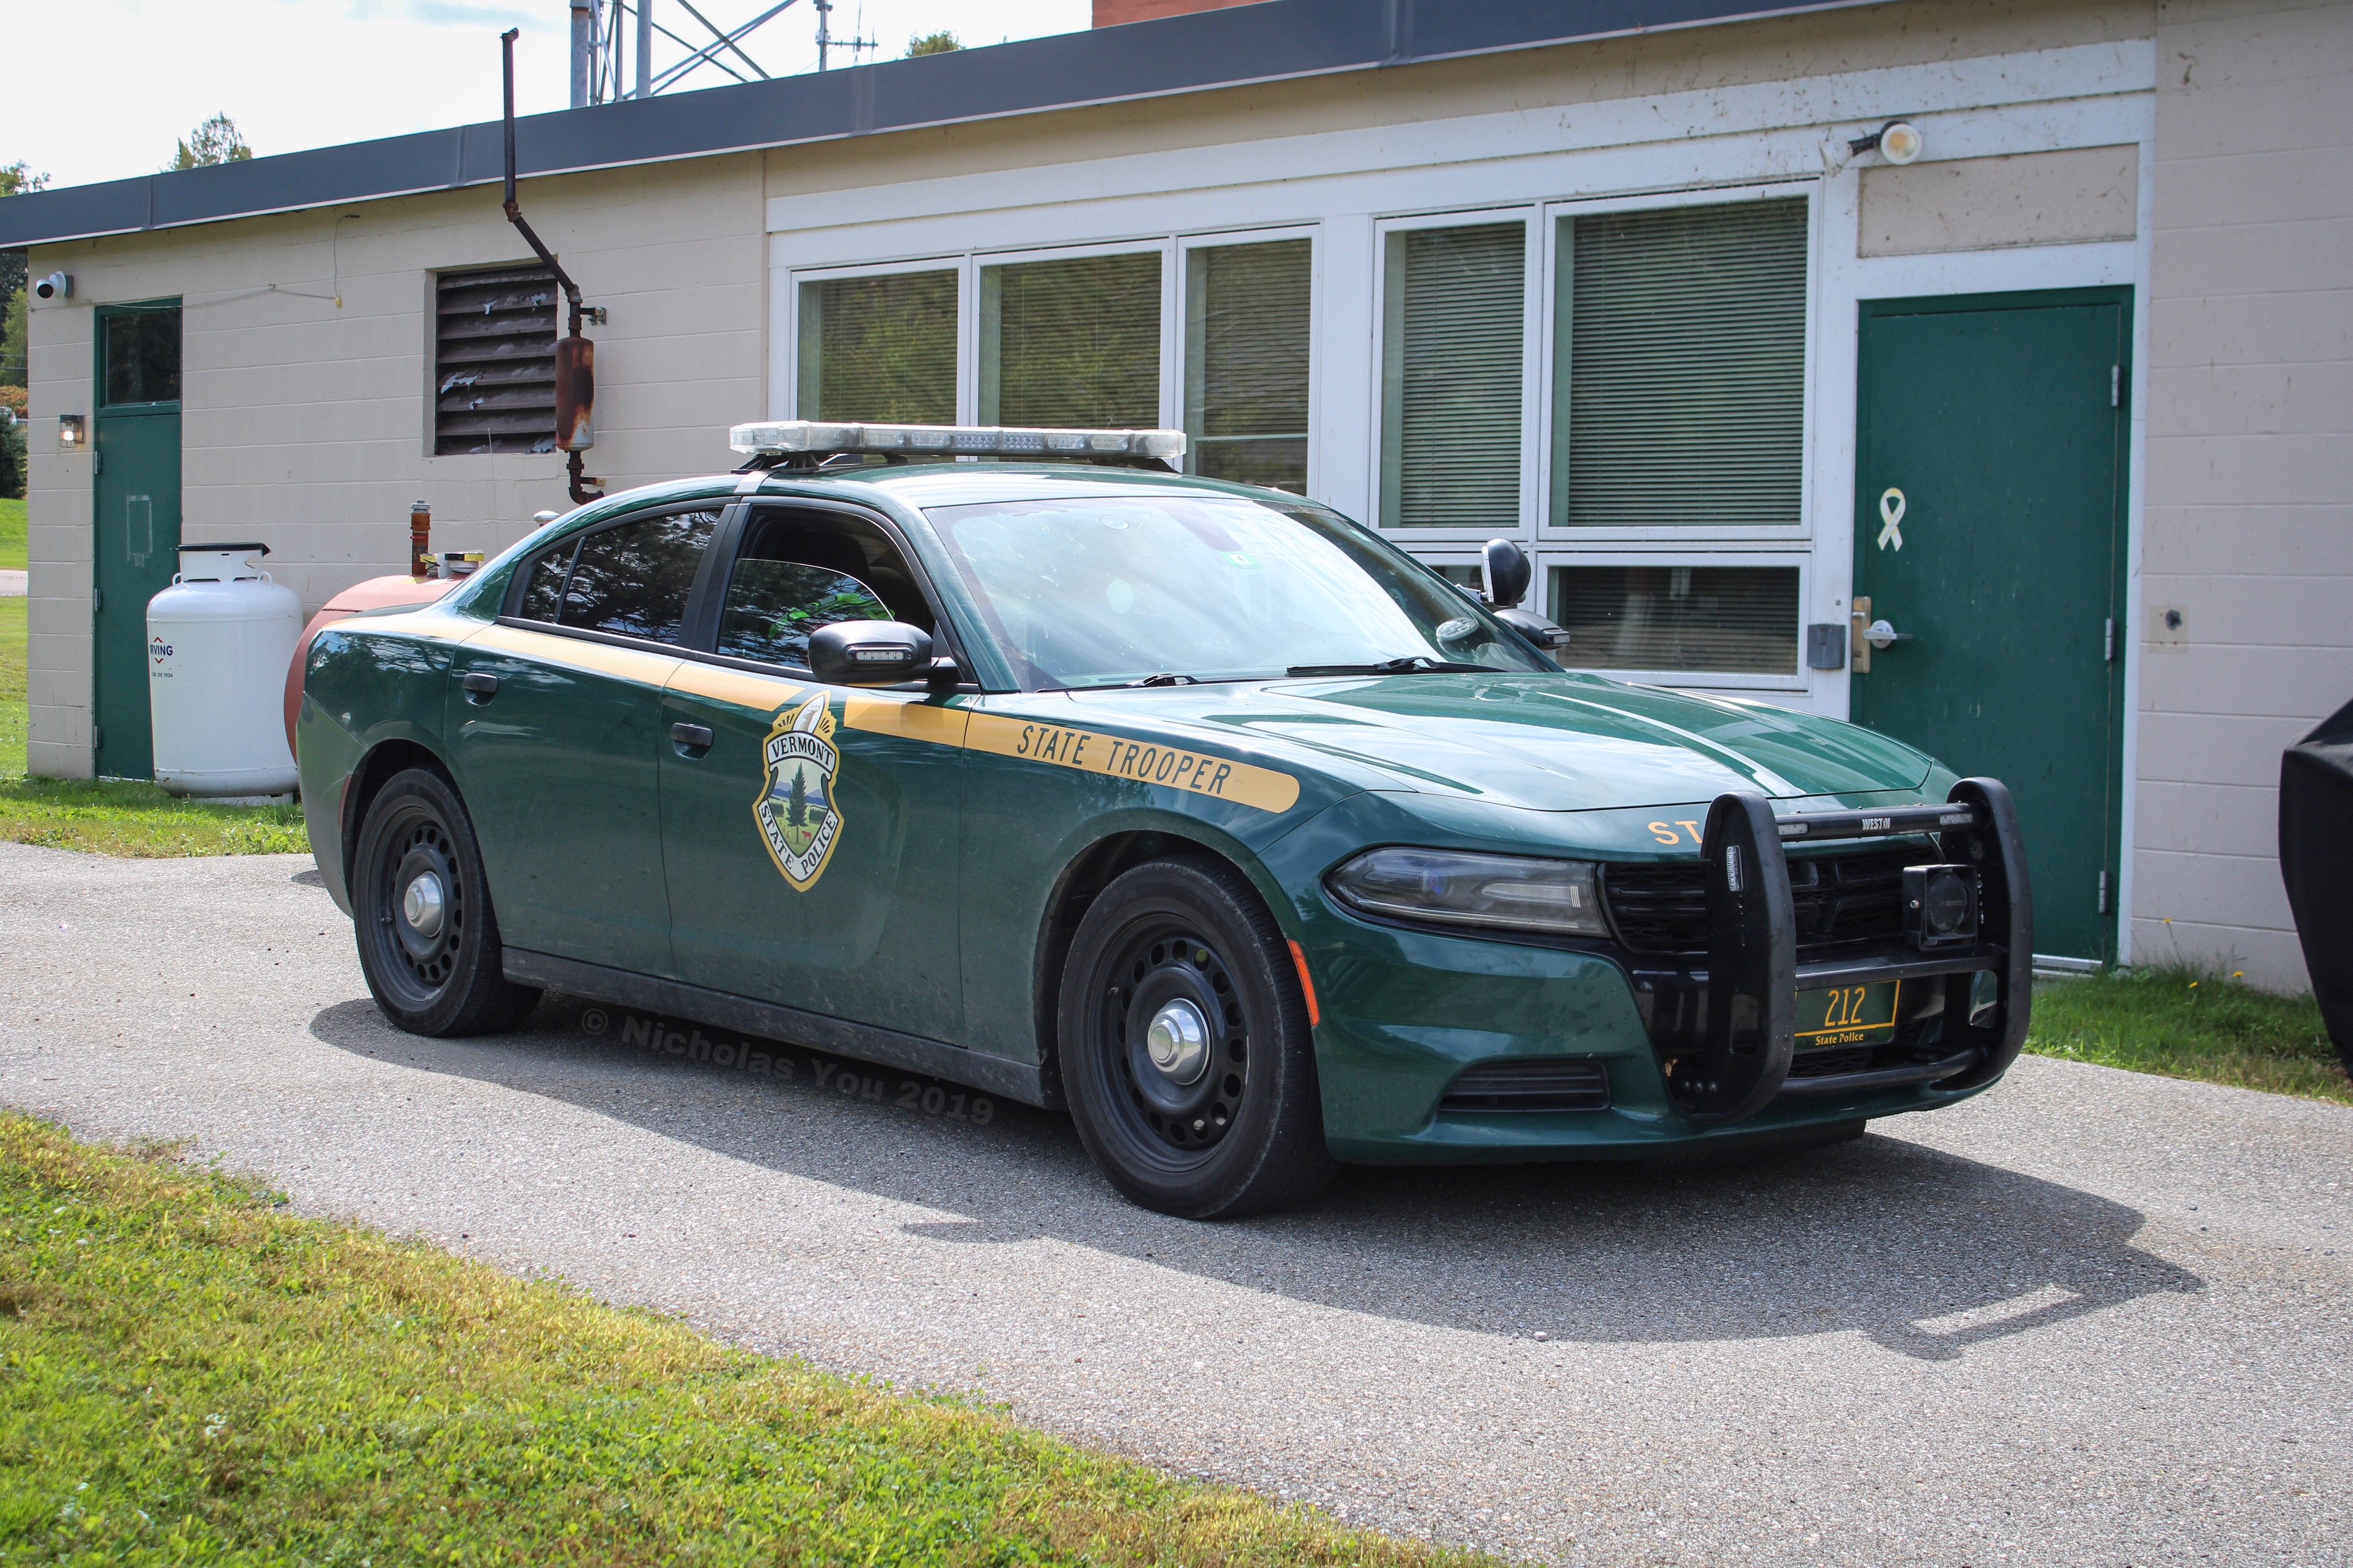 A photo  of Vermont State Police
            Cruiser 212, a 2015-2019 Dodge Charger             taken by Nicholas You